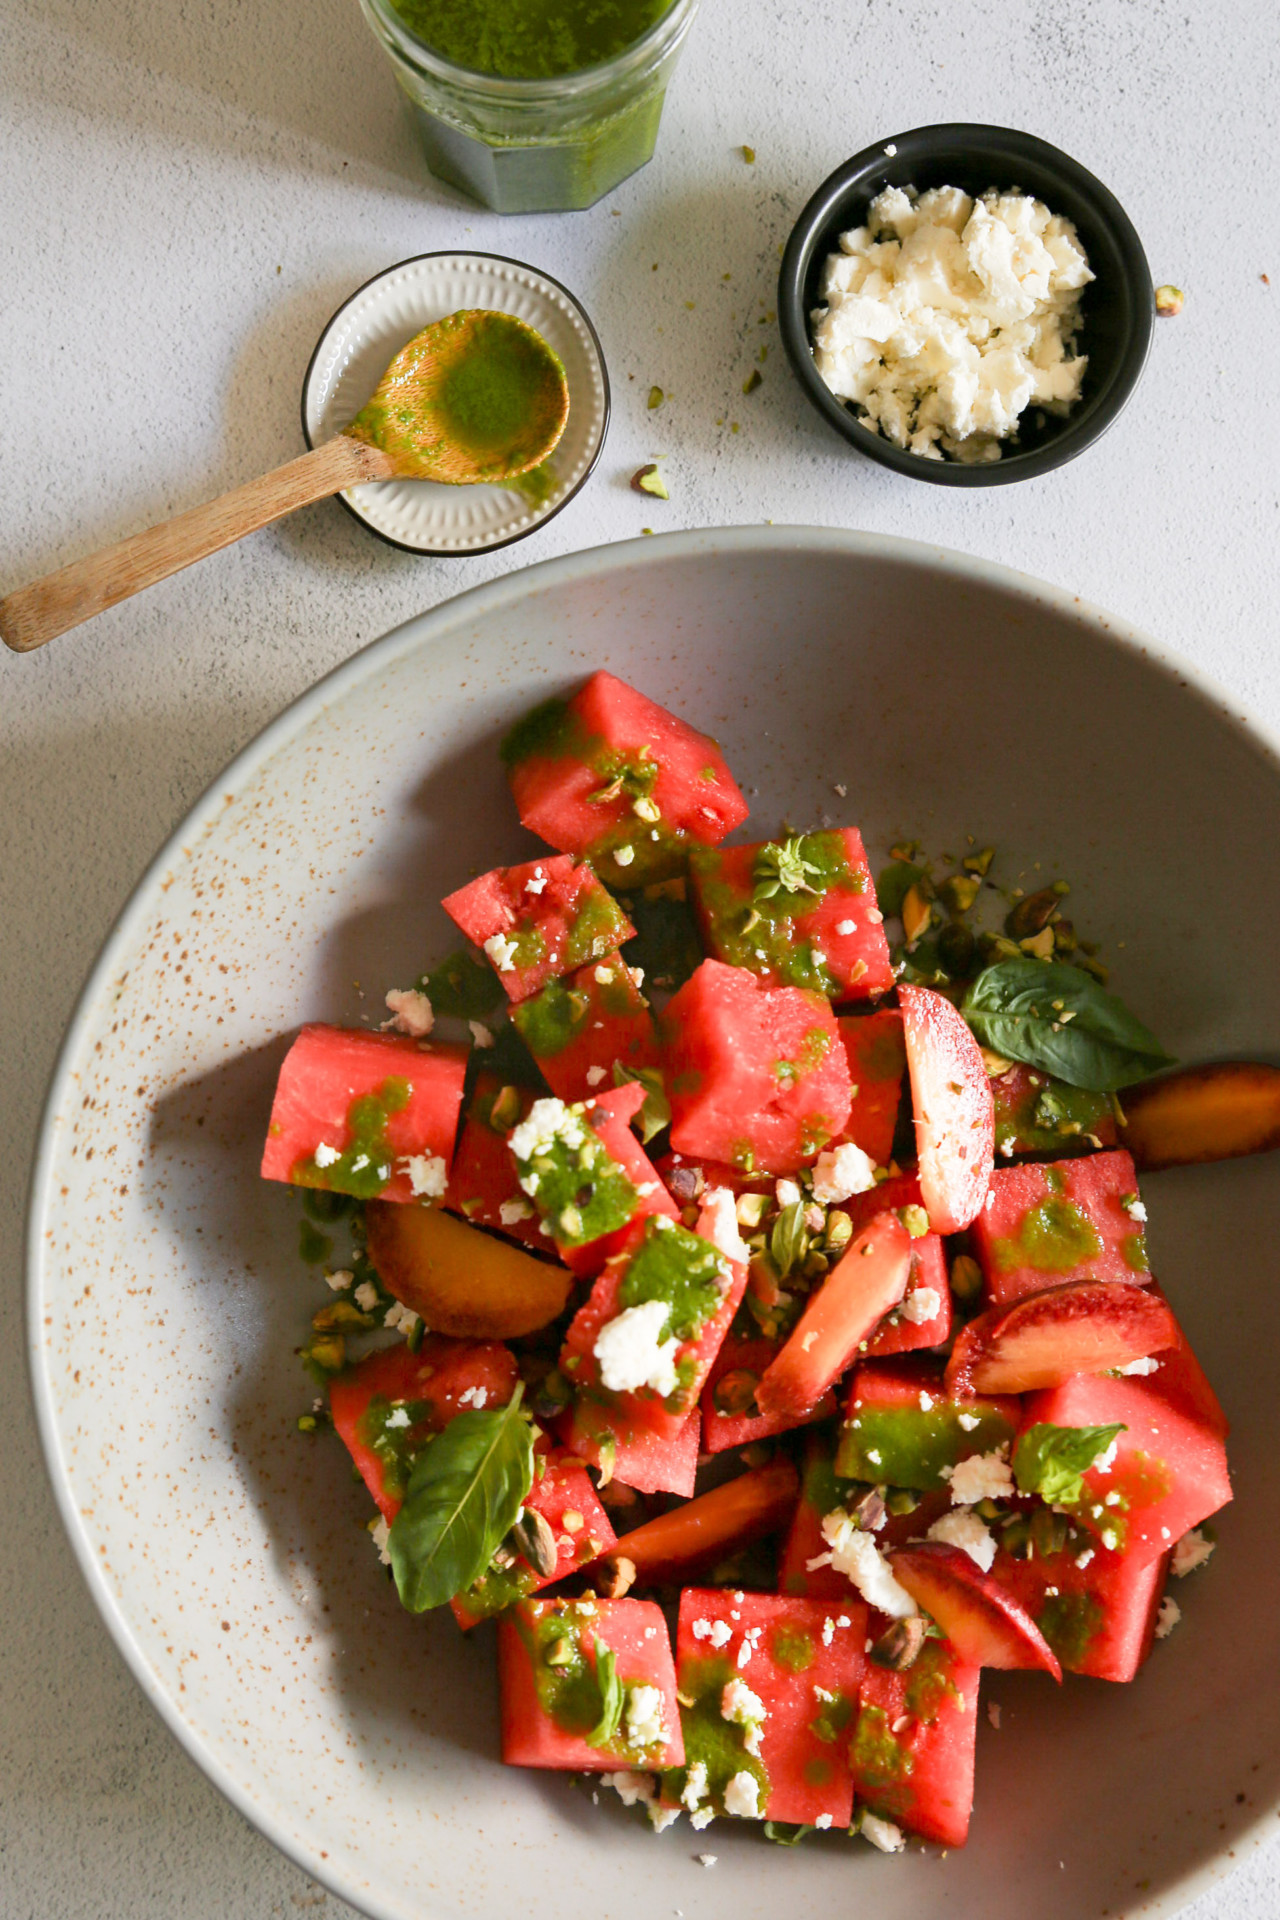 A bowl of watermelon salad with pieces of watermelon and peach, sprinkled with crumbled feta cheese, basil leaves, and a basil vinaigrette. Nearby, a small dish with green powder and a wooden spoon, a black bowl of crumbled feta, and a jar of basil vinaigrette are arranged on the gray surface.